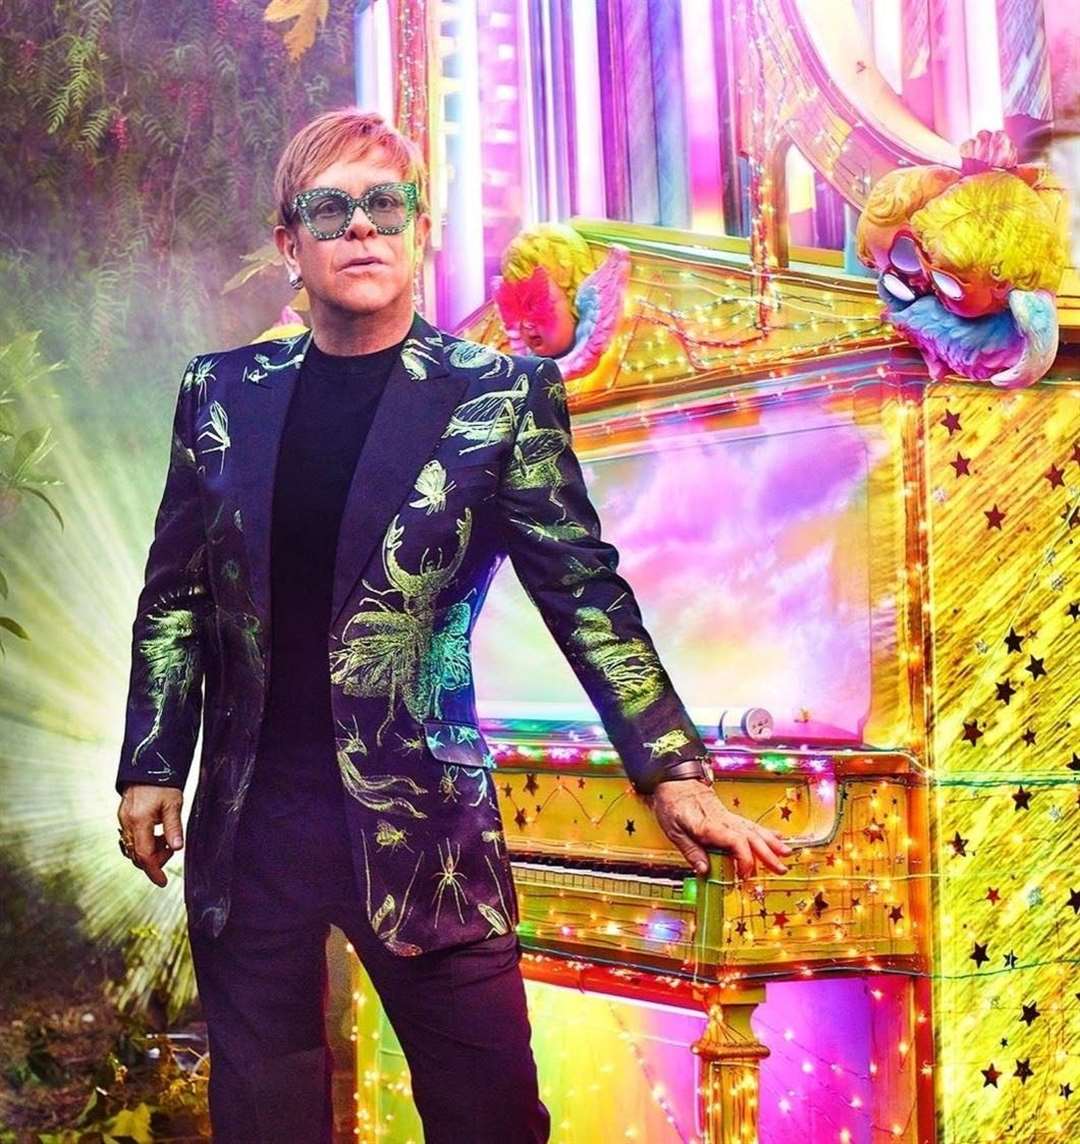 Elton John is just one of the many acts streaming music this week.